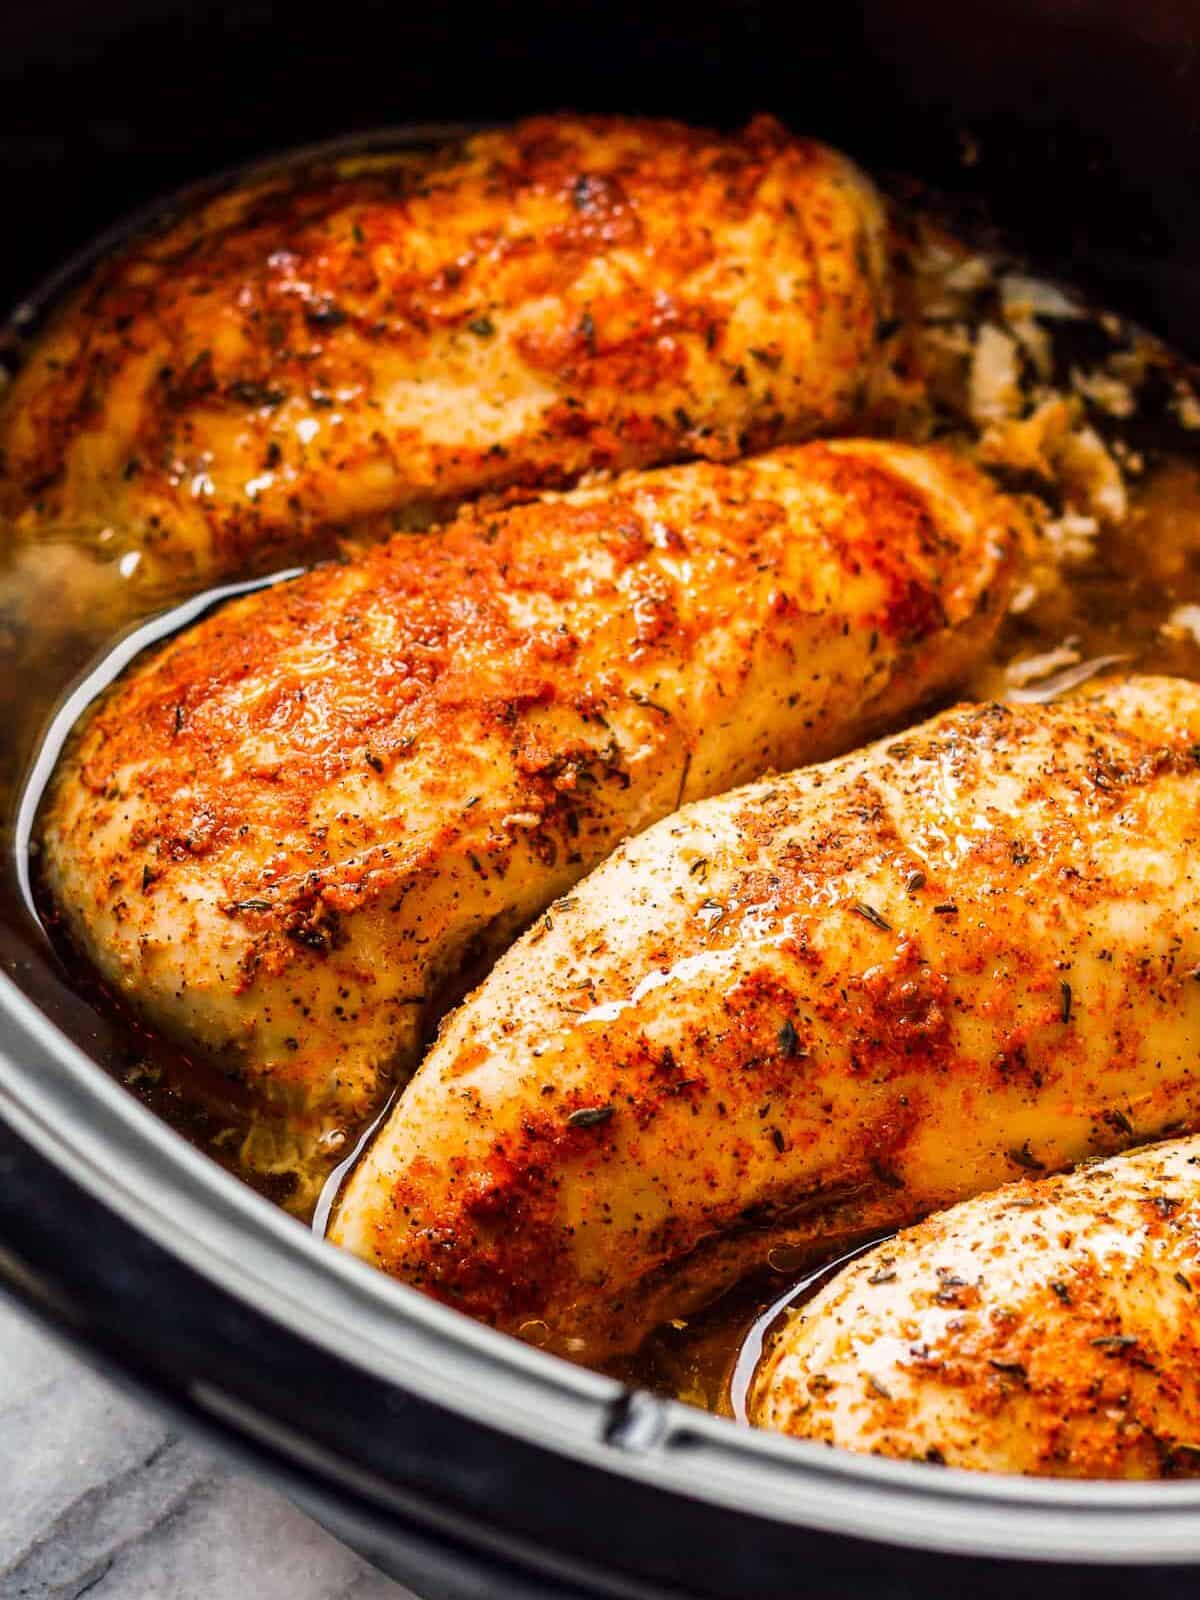 seasoned chicken breasts cooked in a crockpot.